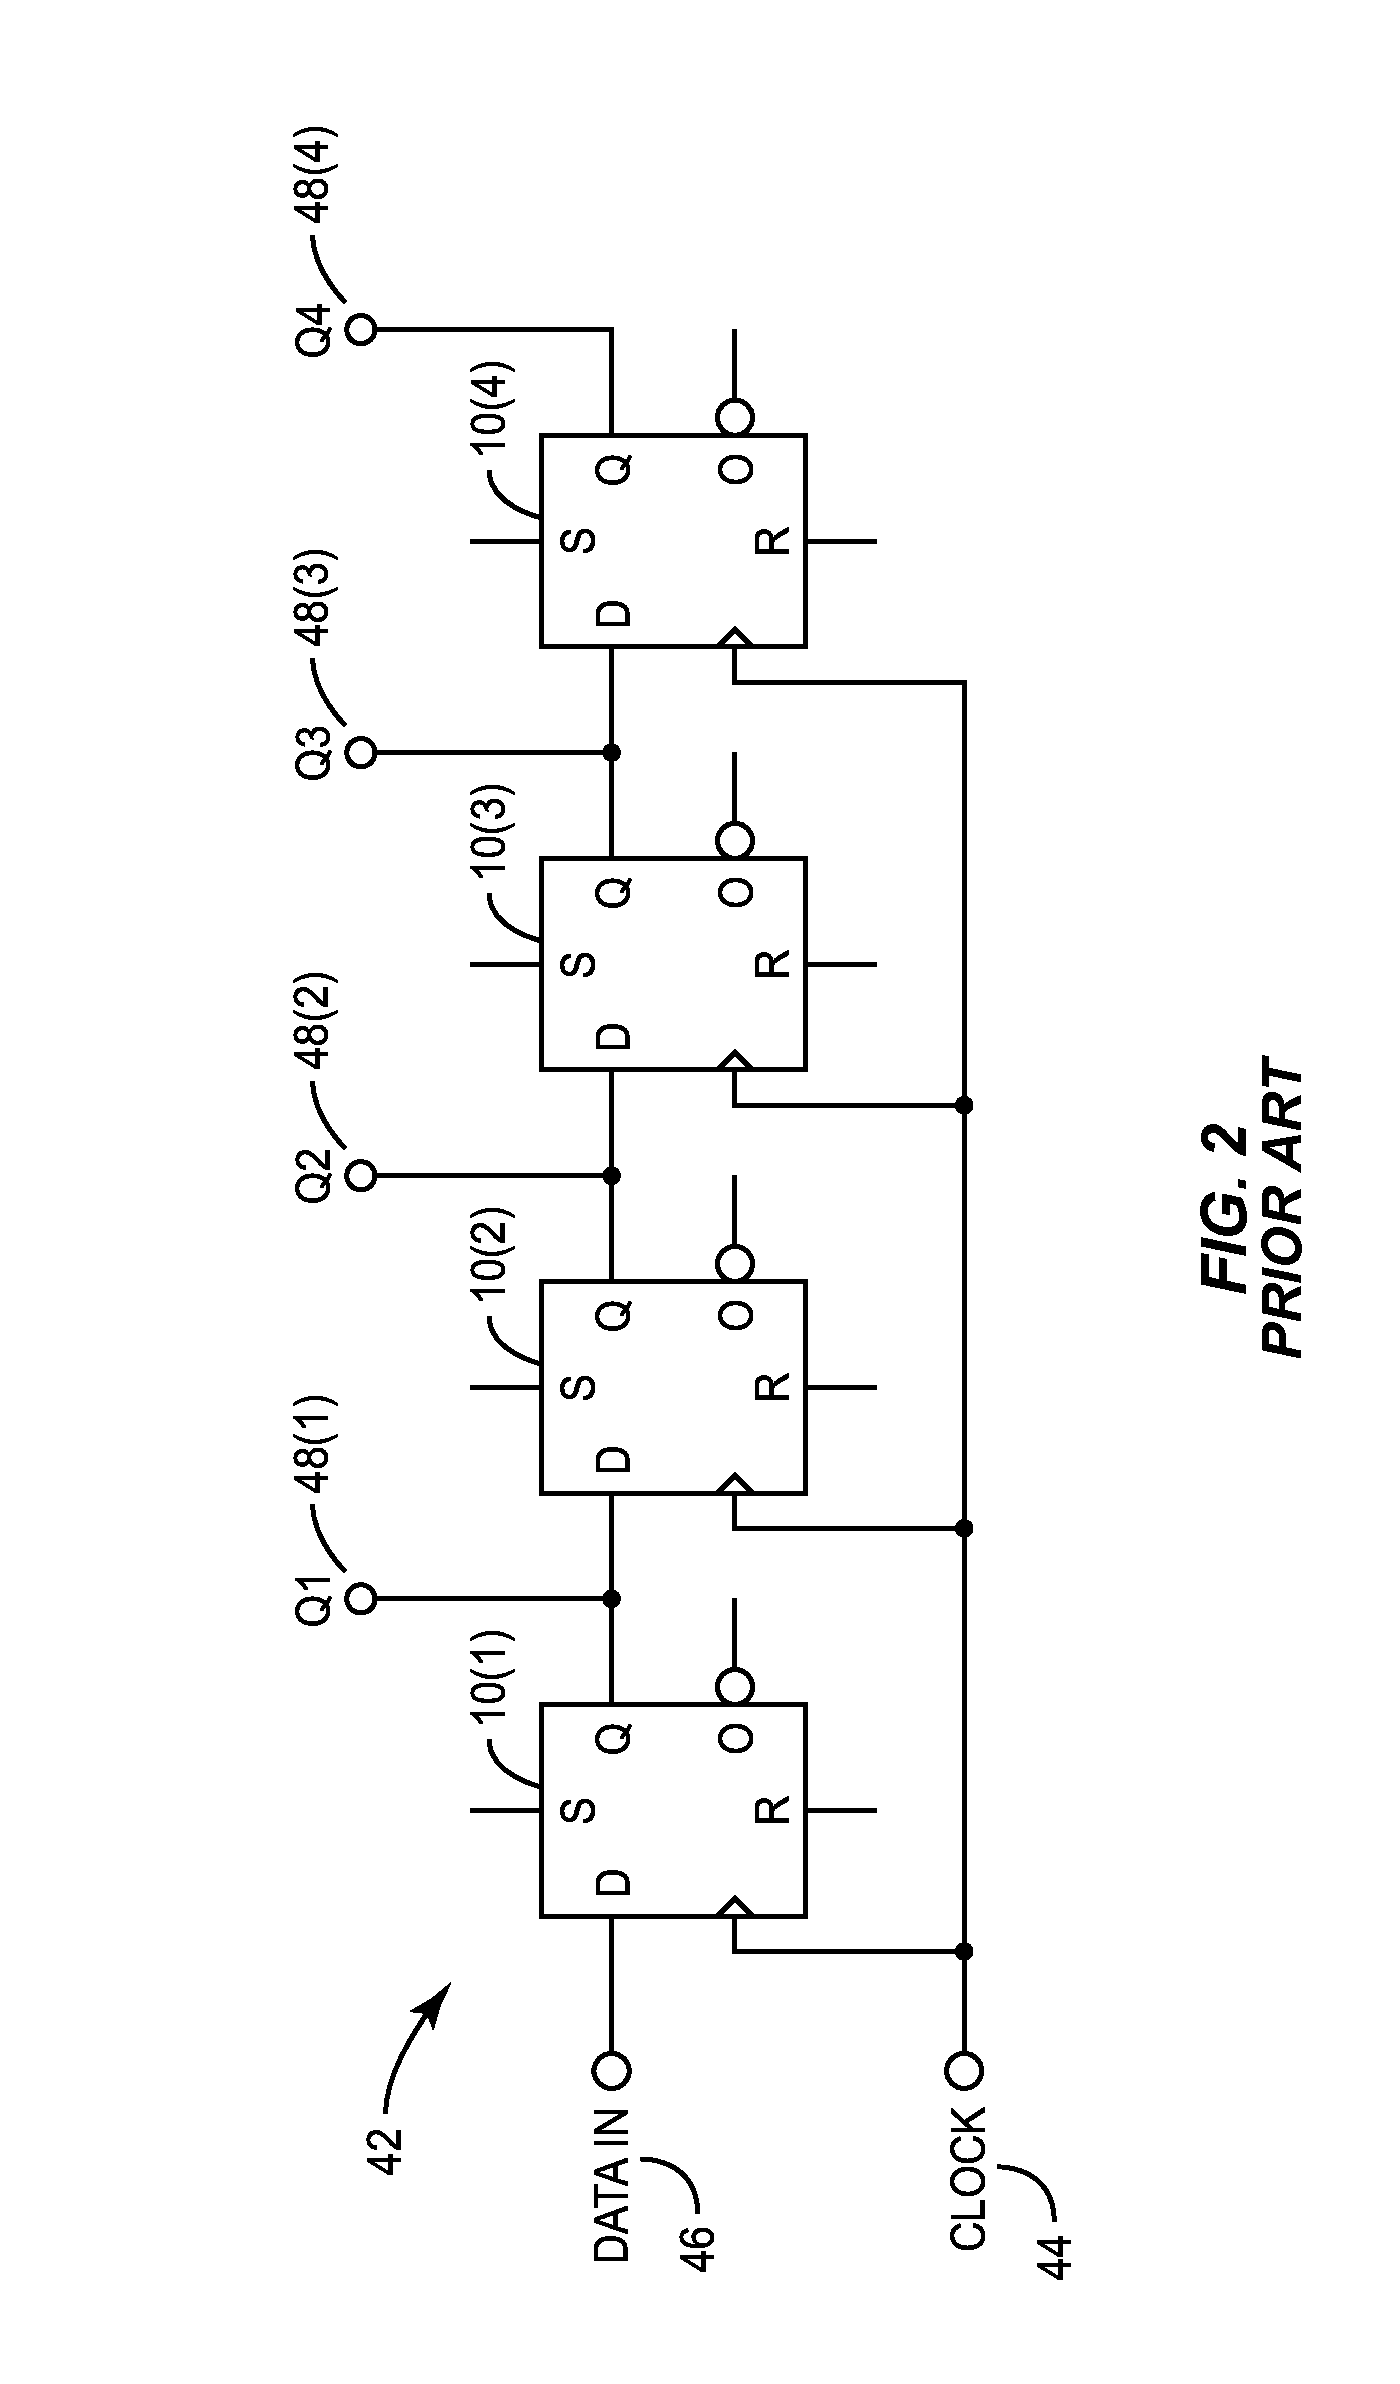 THREE-DIMENSIONAL (3D) MEMORY CELL SEPARATION AMONG 3D INTEGRATED CIRCUIT (IC) TIERS, AND RELATED 3D INTEGRATED CIRCUITS (3DICs), 3DIC PROCESSOR CORES, AND METHODS